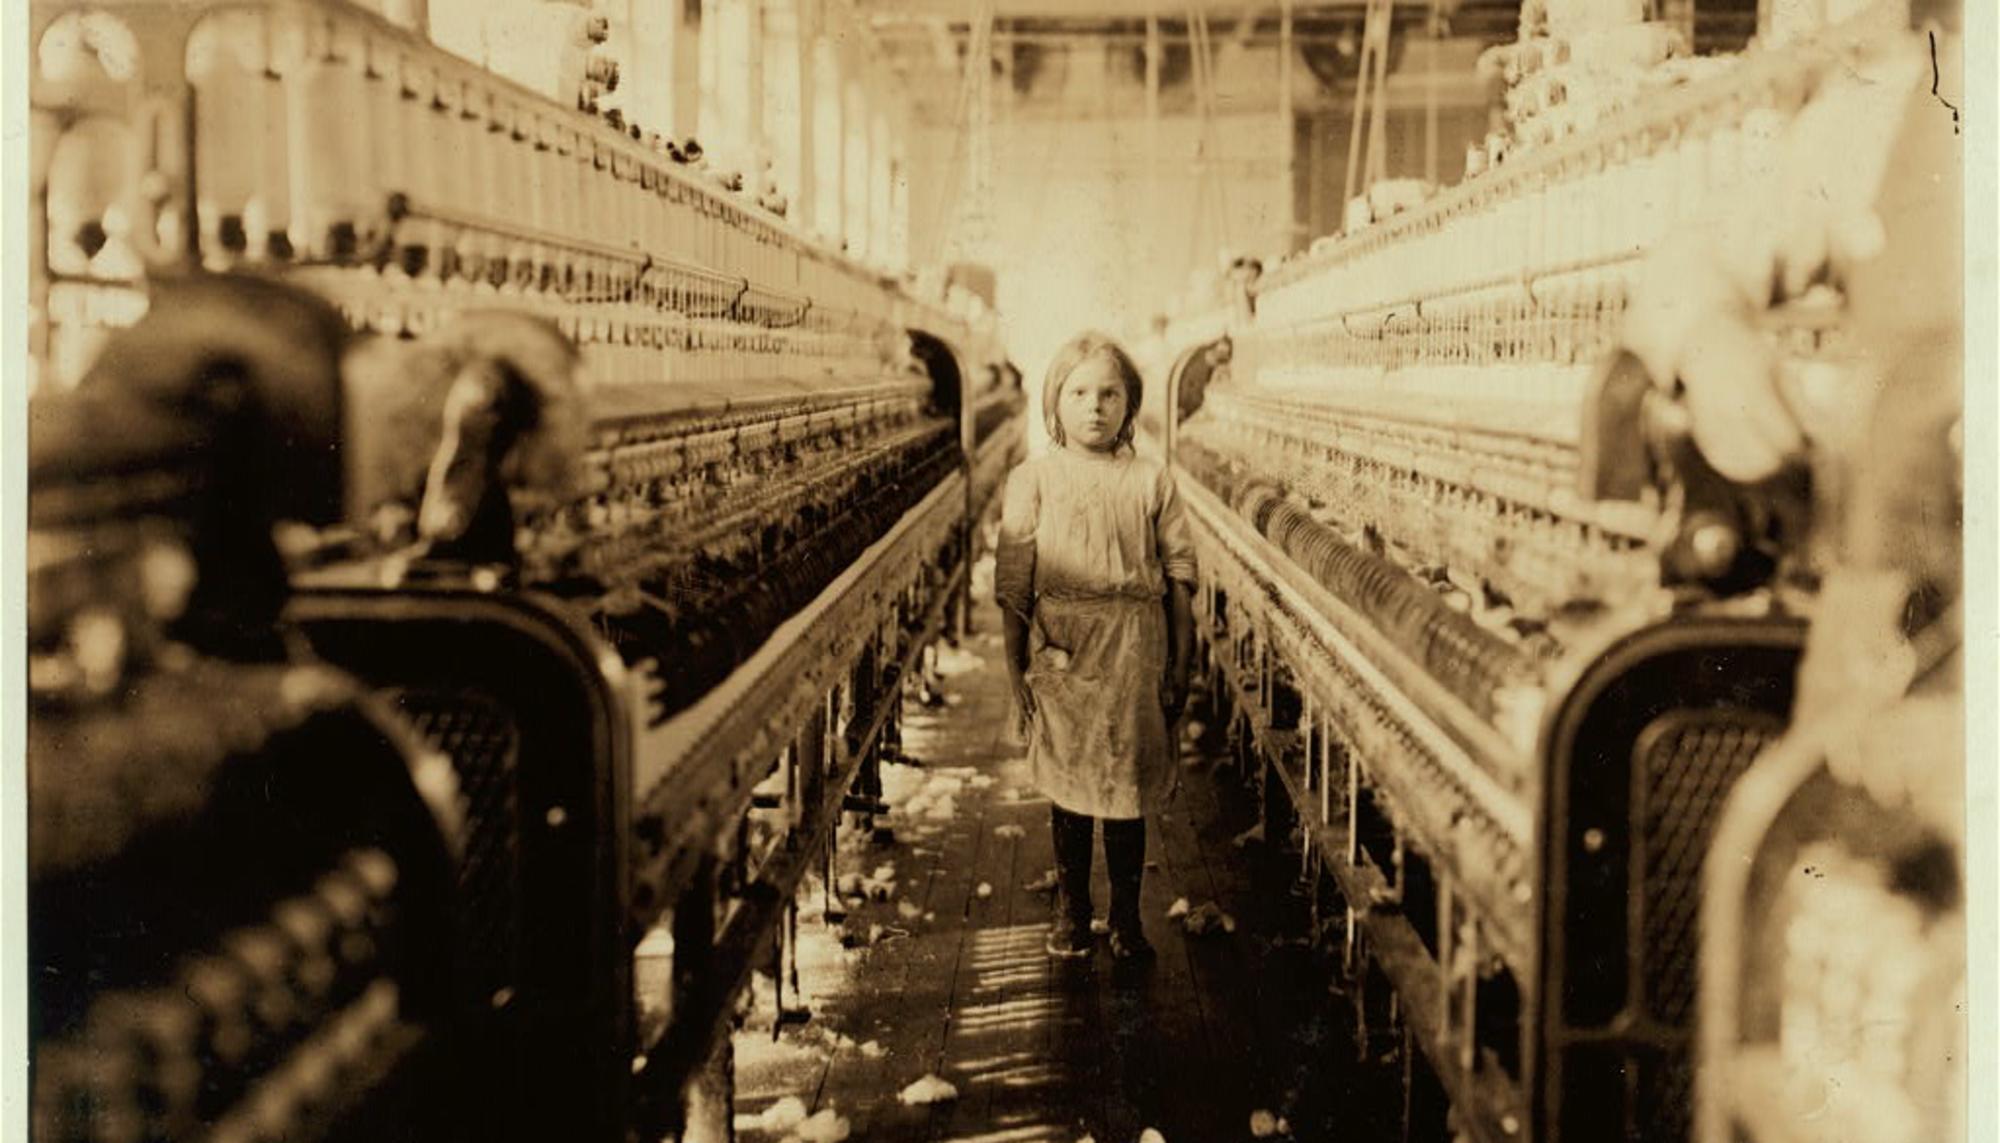 Child laborer in a South Carolina textile mill, 1908. Photograph by Lewis Hine. Image courtesy Library of Congress.